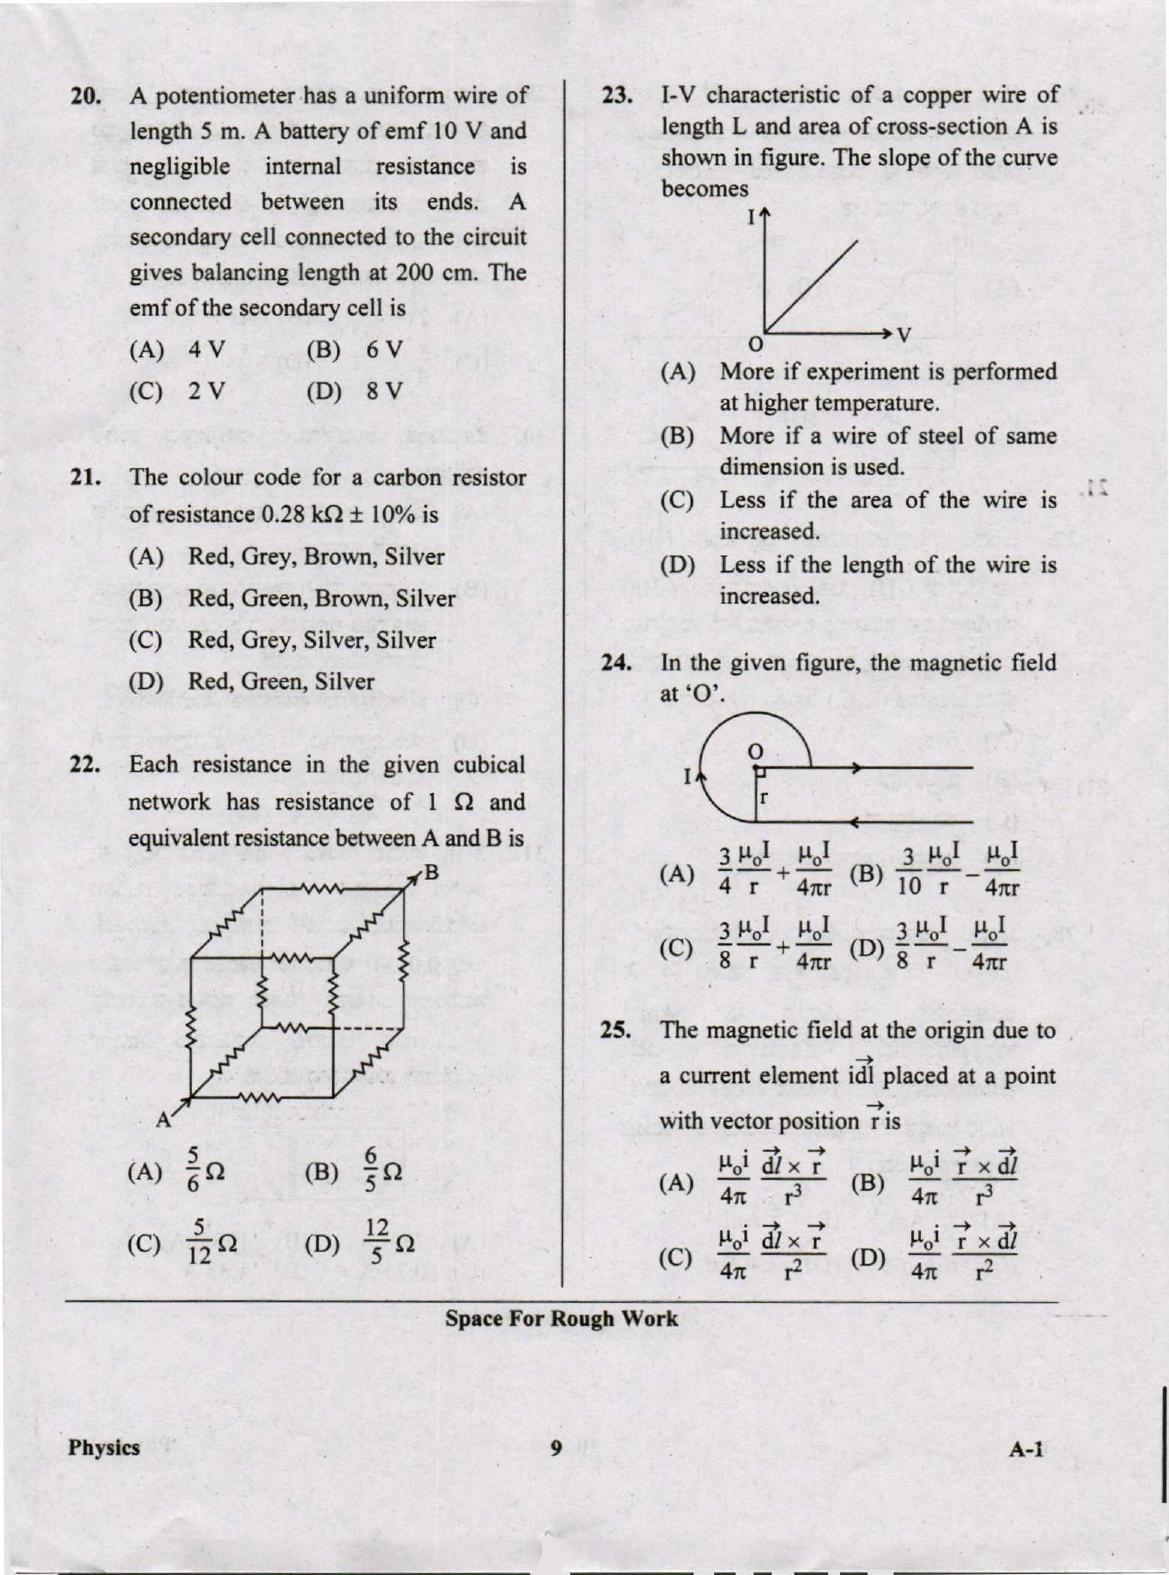 KCET Physics 2020 Question Papers - Page 9